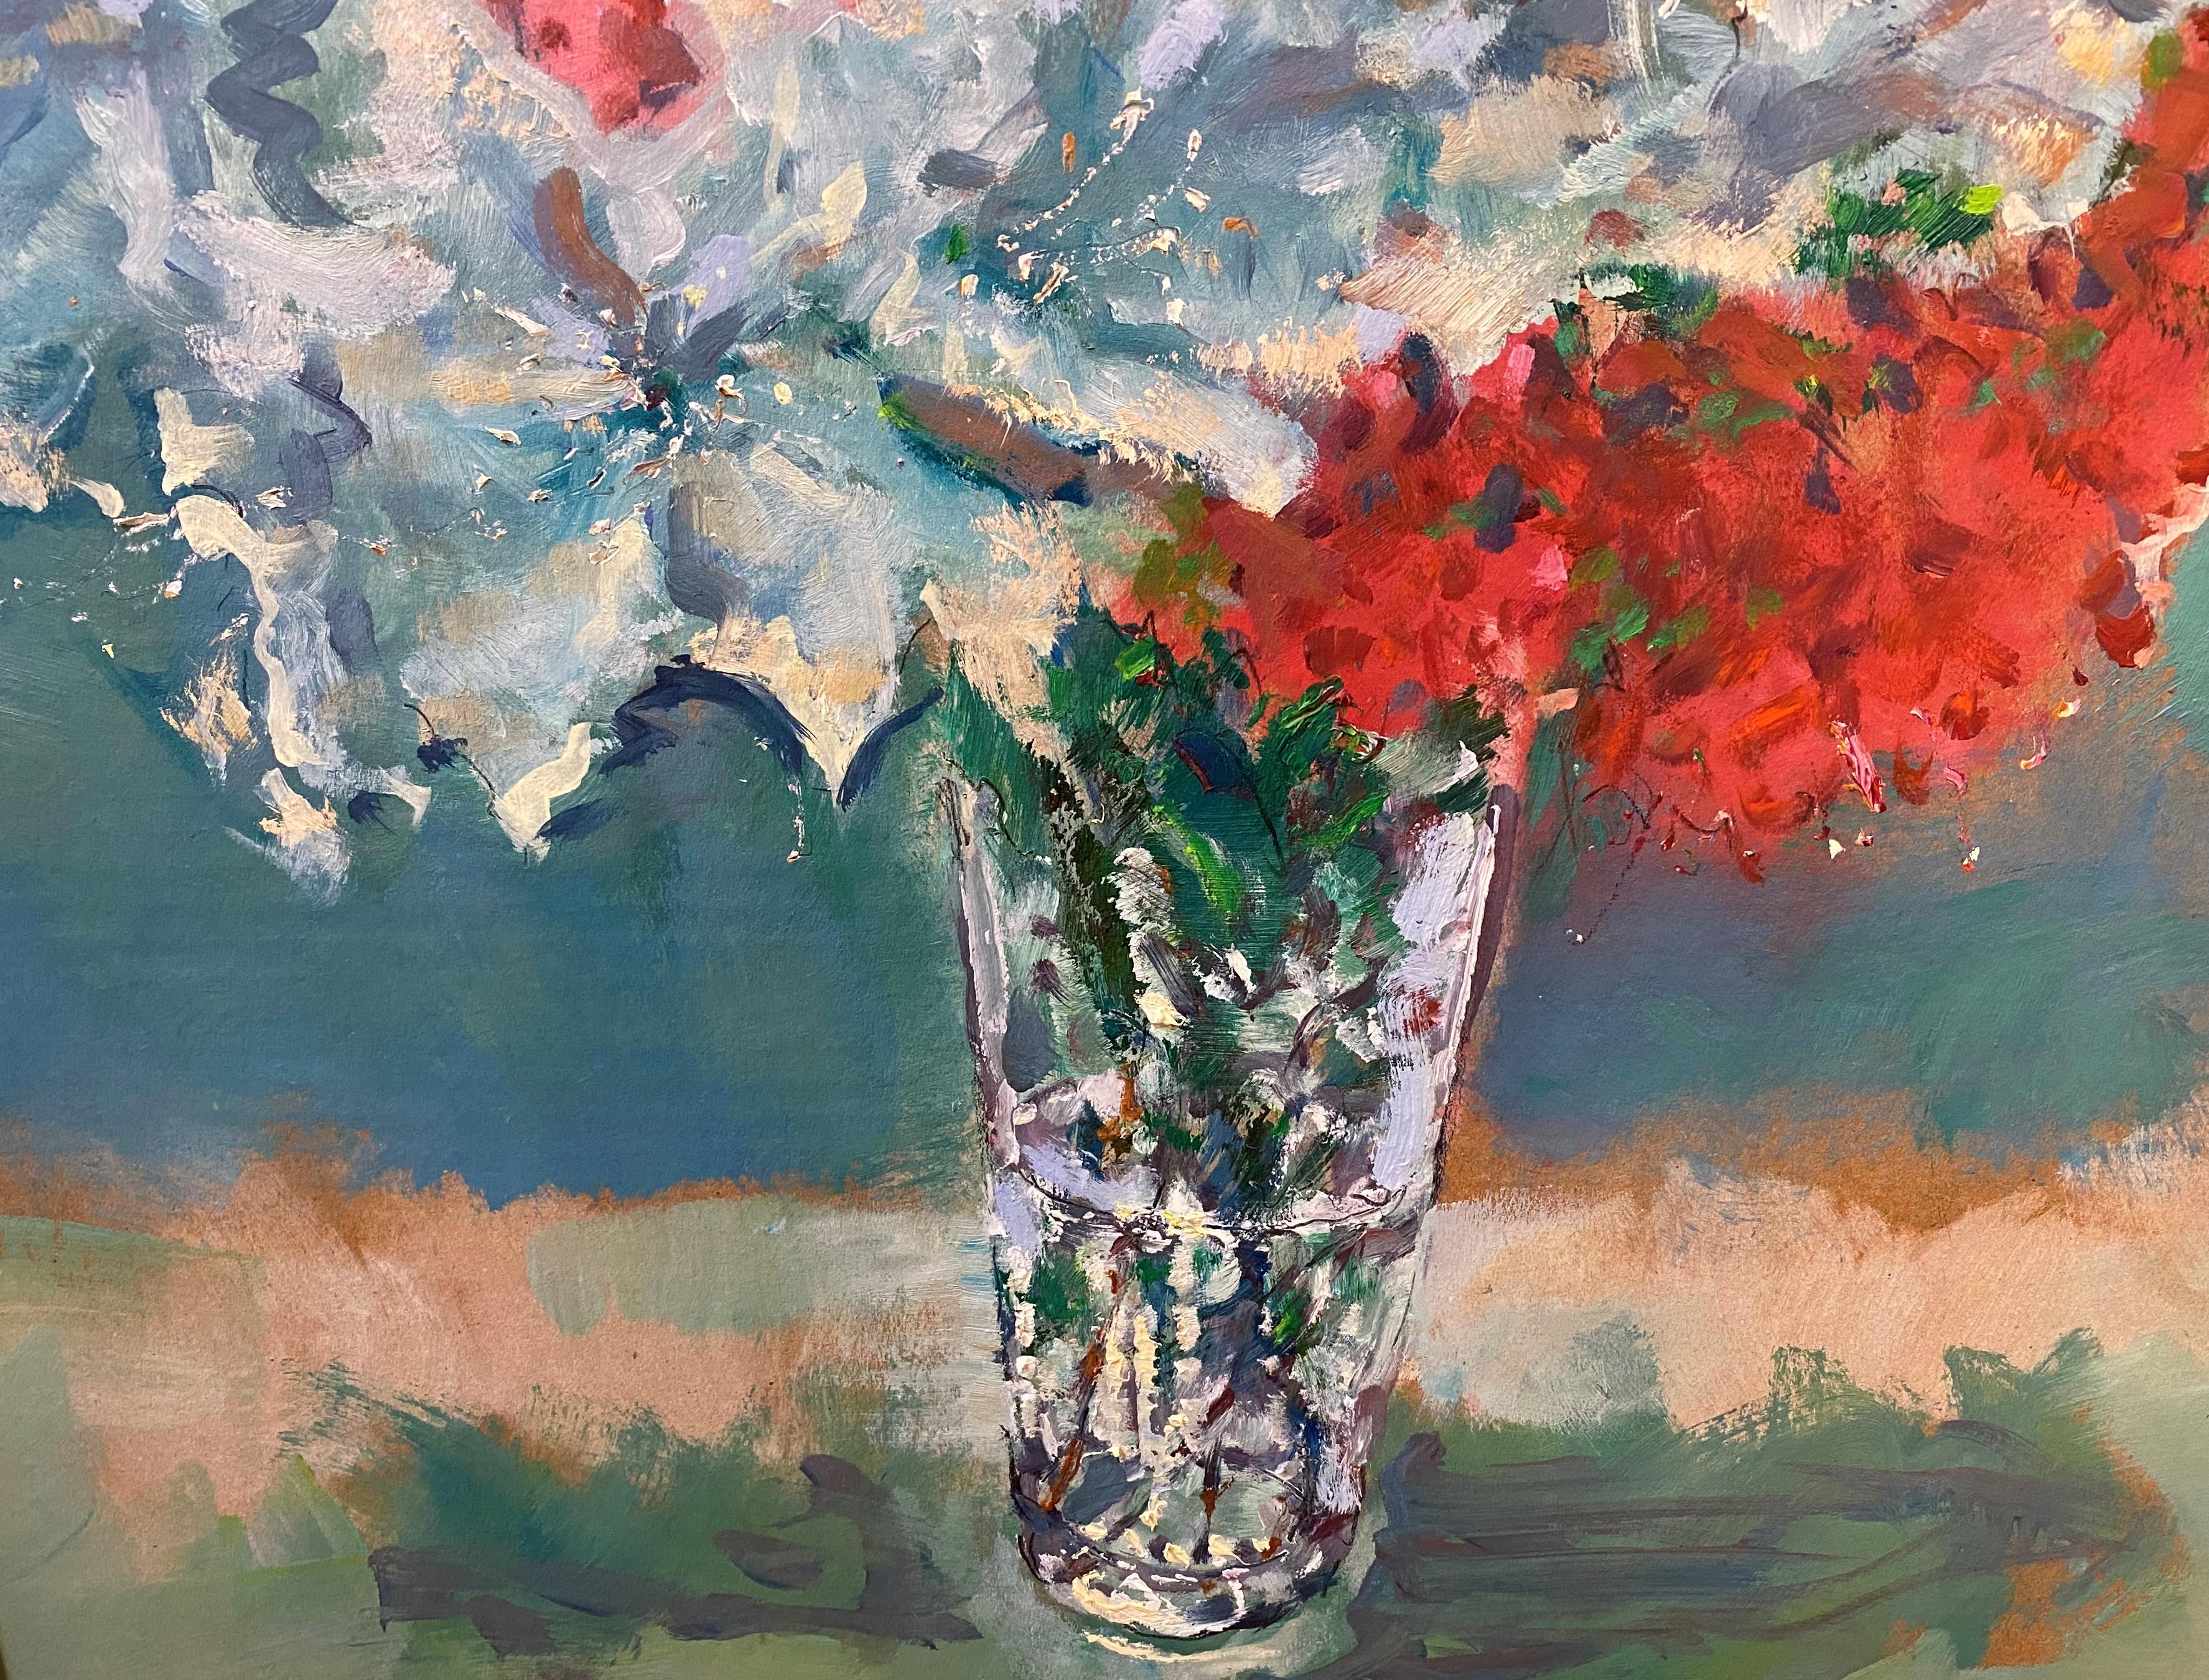 Flower Bouquet in Cut Glass - American Impressionist Painting by Stephen Motyka